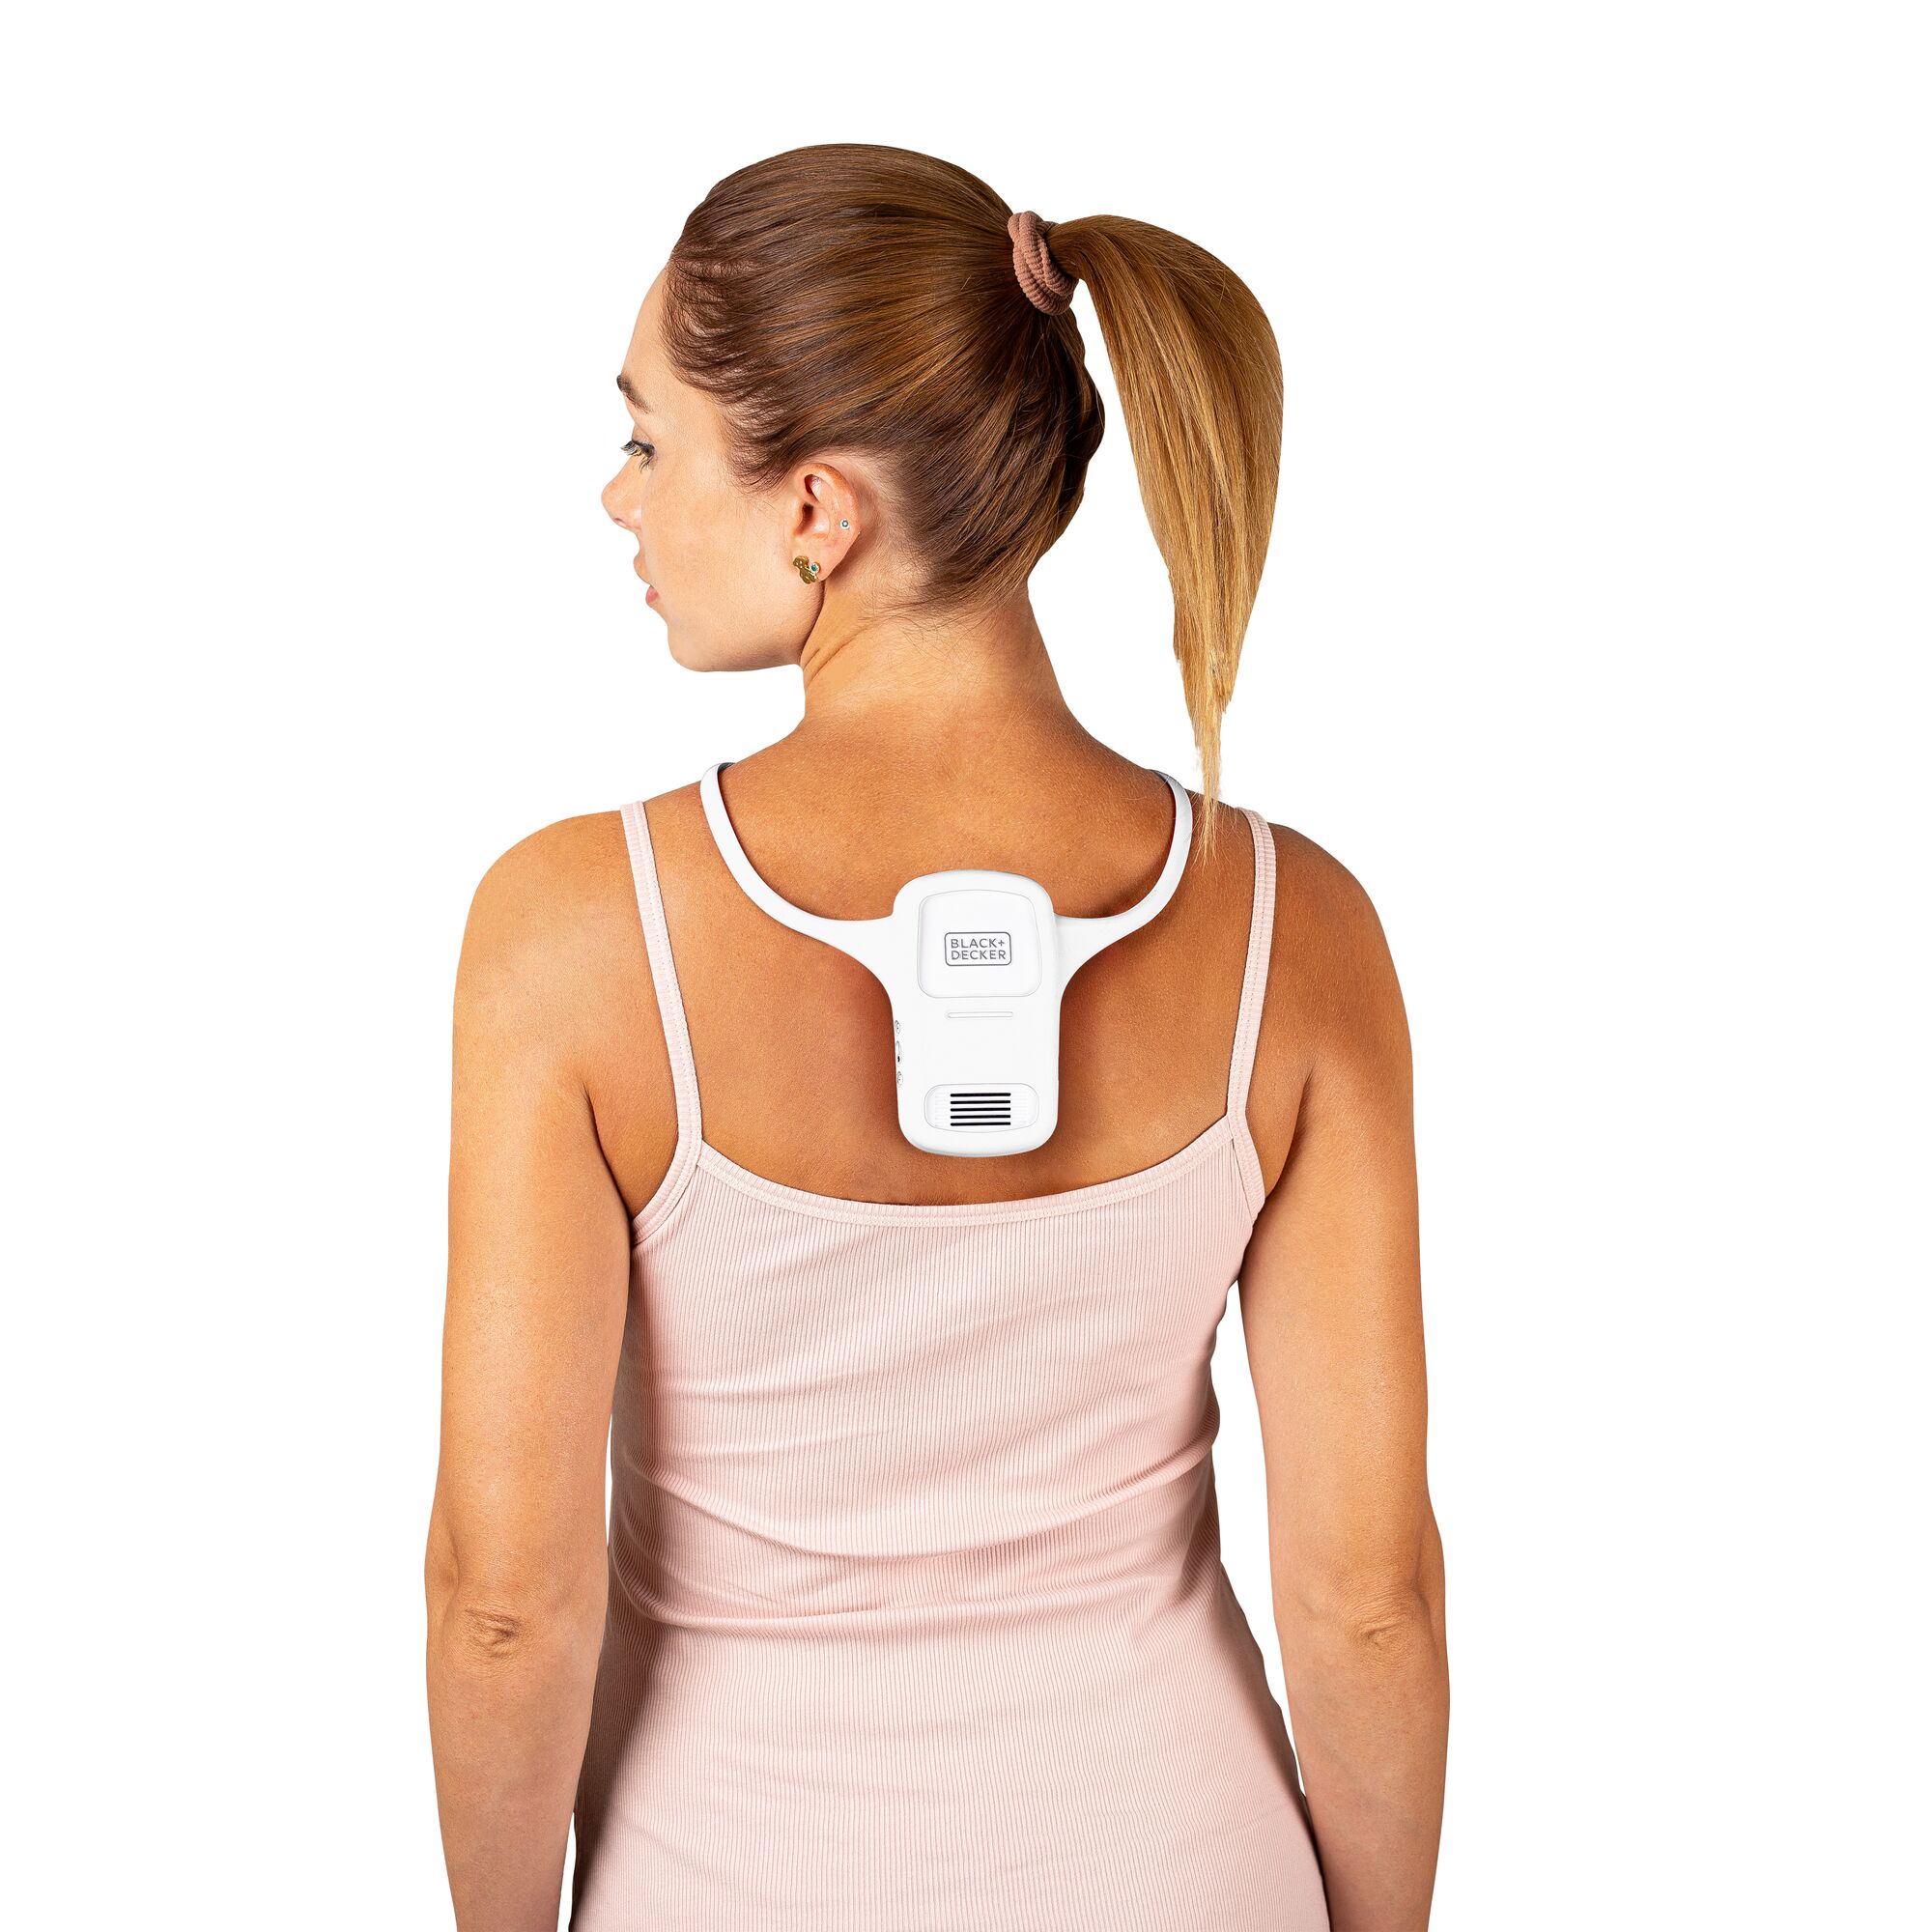 rear view of the comfortpak™ device in the cloud white 360° lanyard worn around the back of a woman's neck